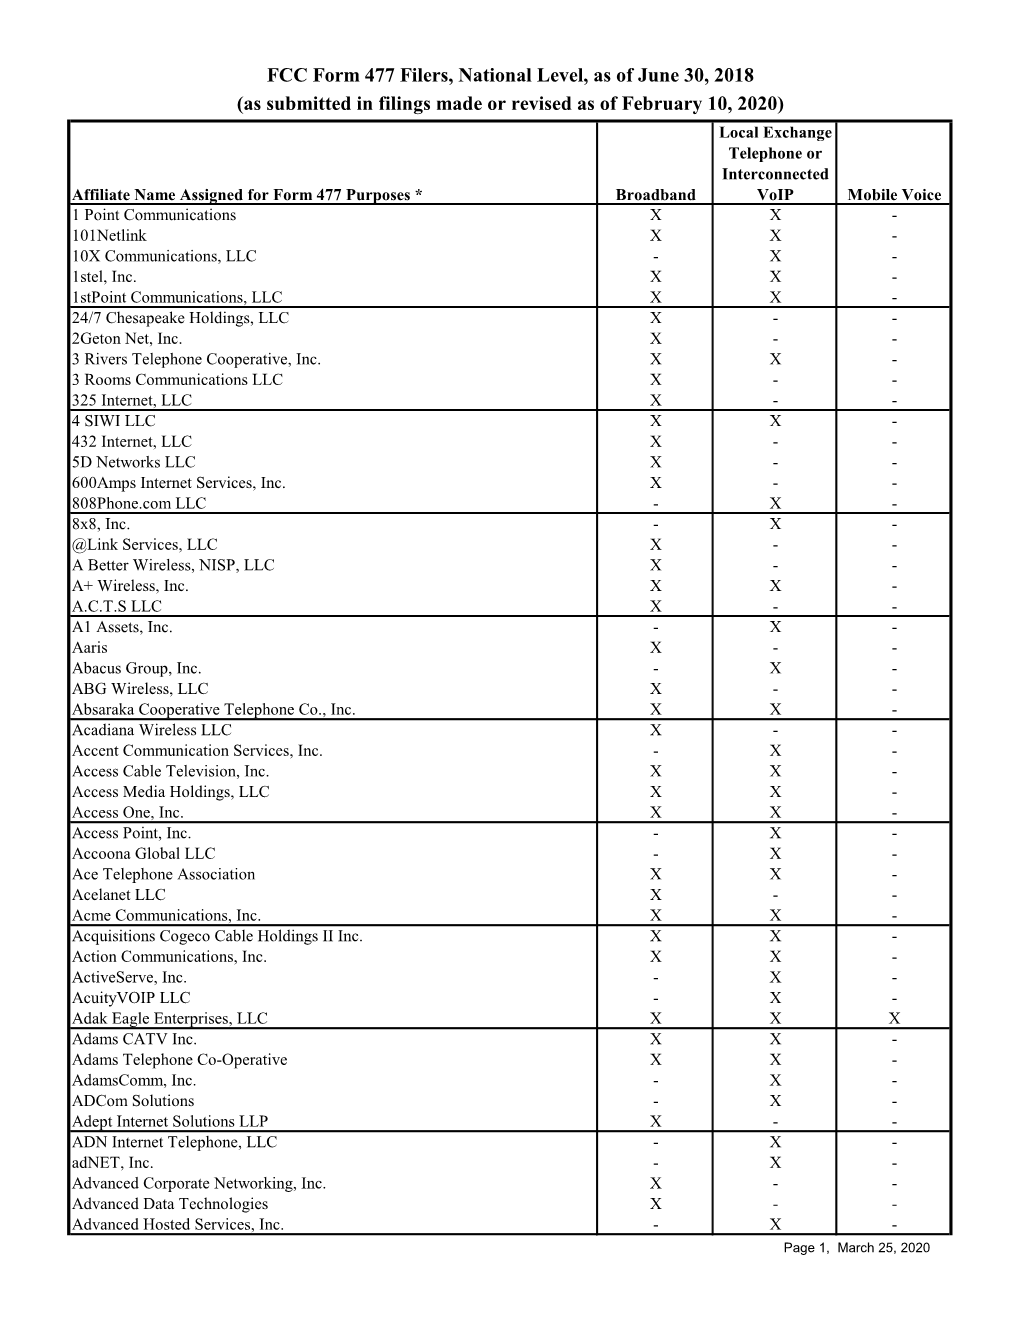 FCC Form 477 Filers, National Level, As of June 30, 2018